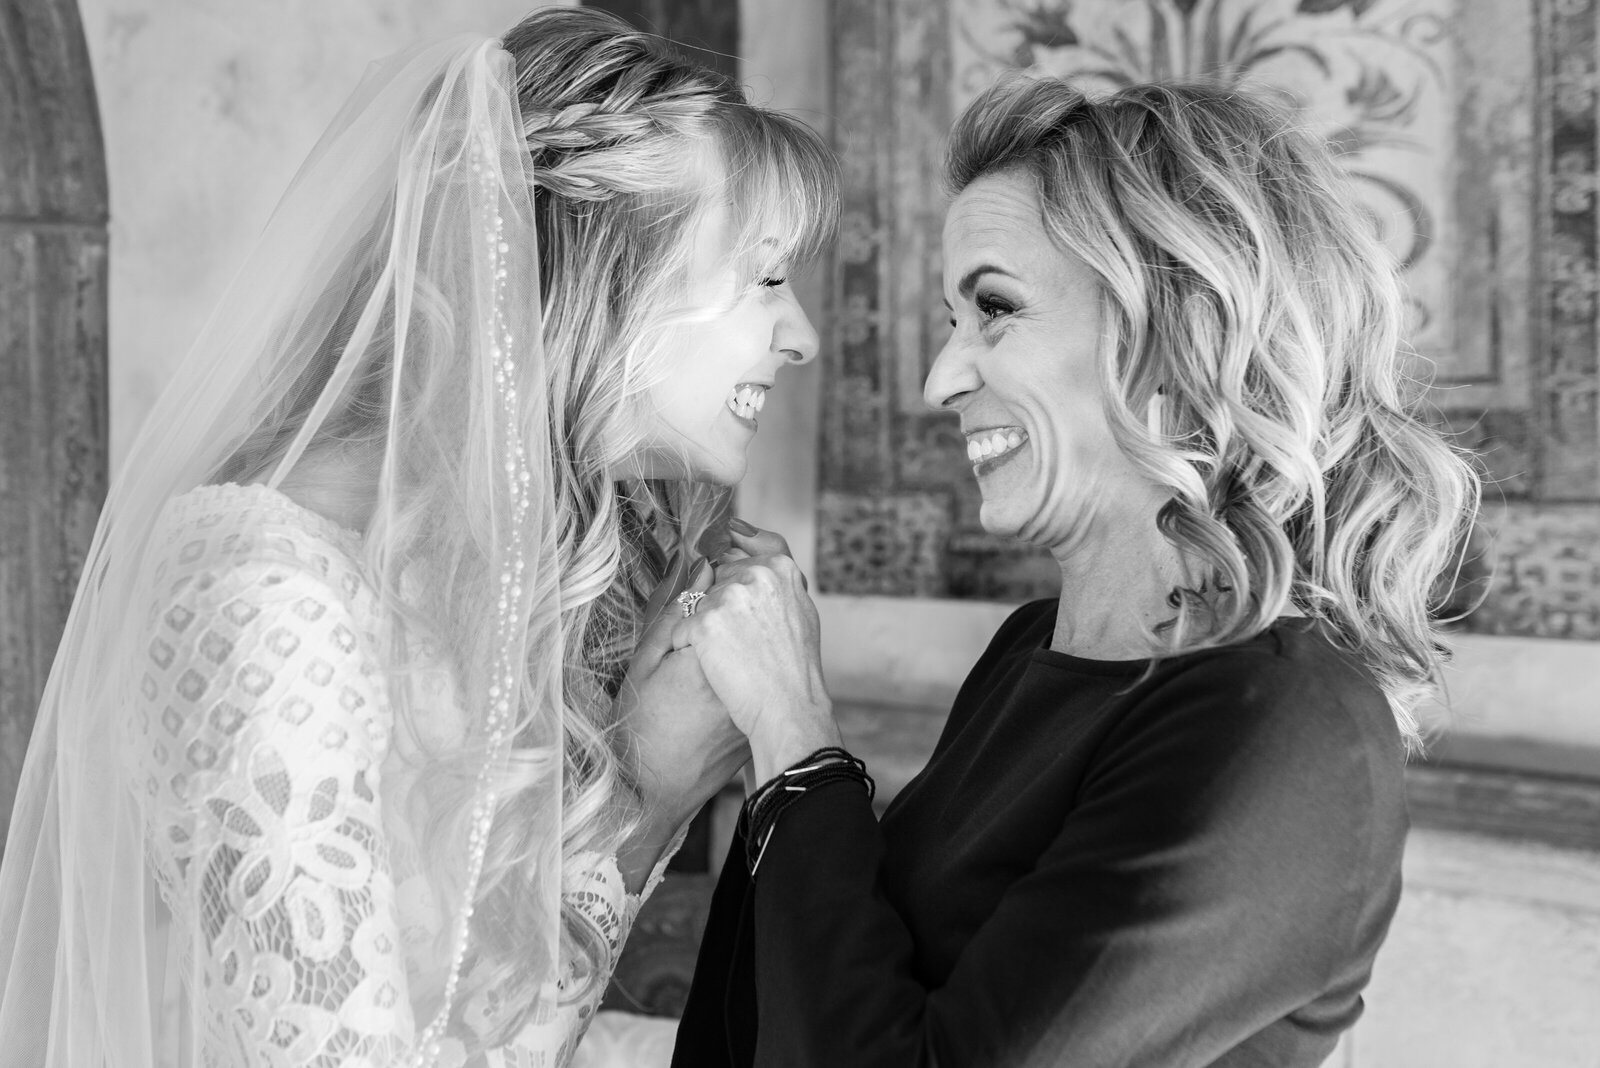 Bride and her mom sharing an excited moment while getting ready before the wedding.